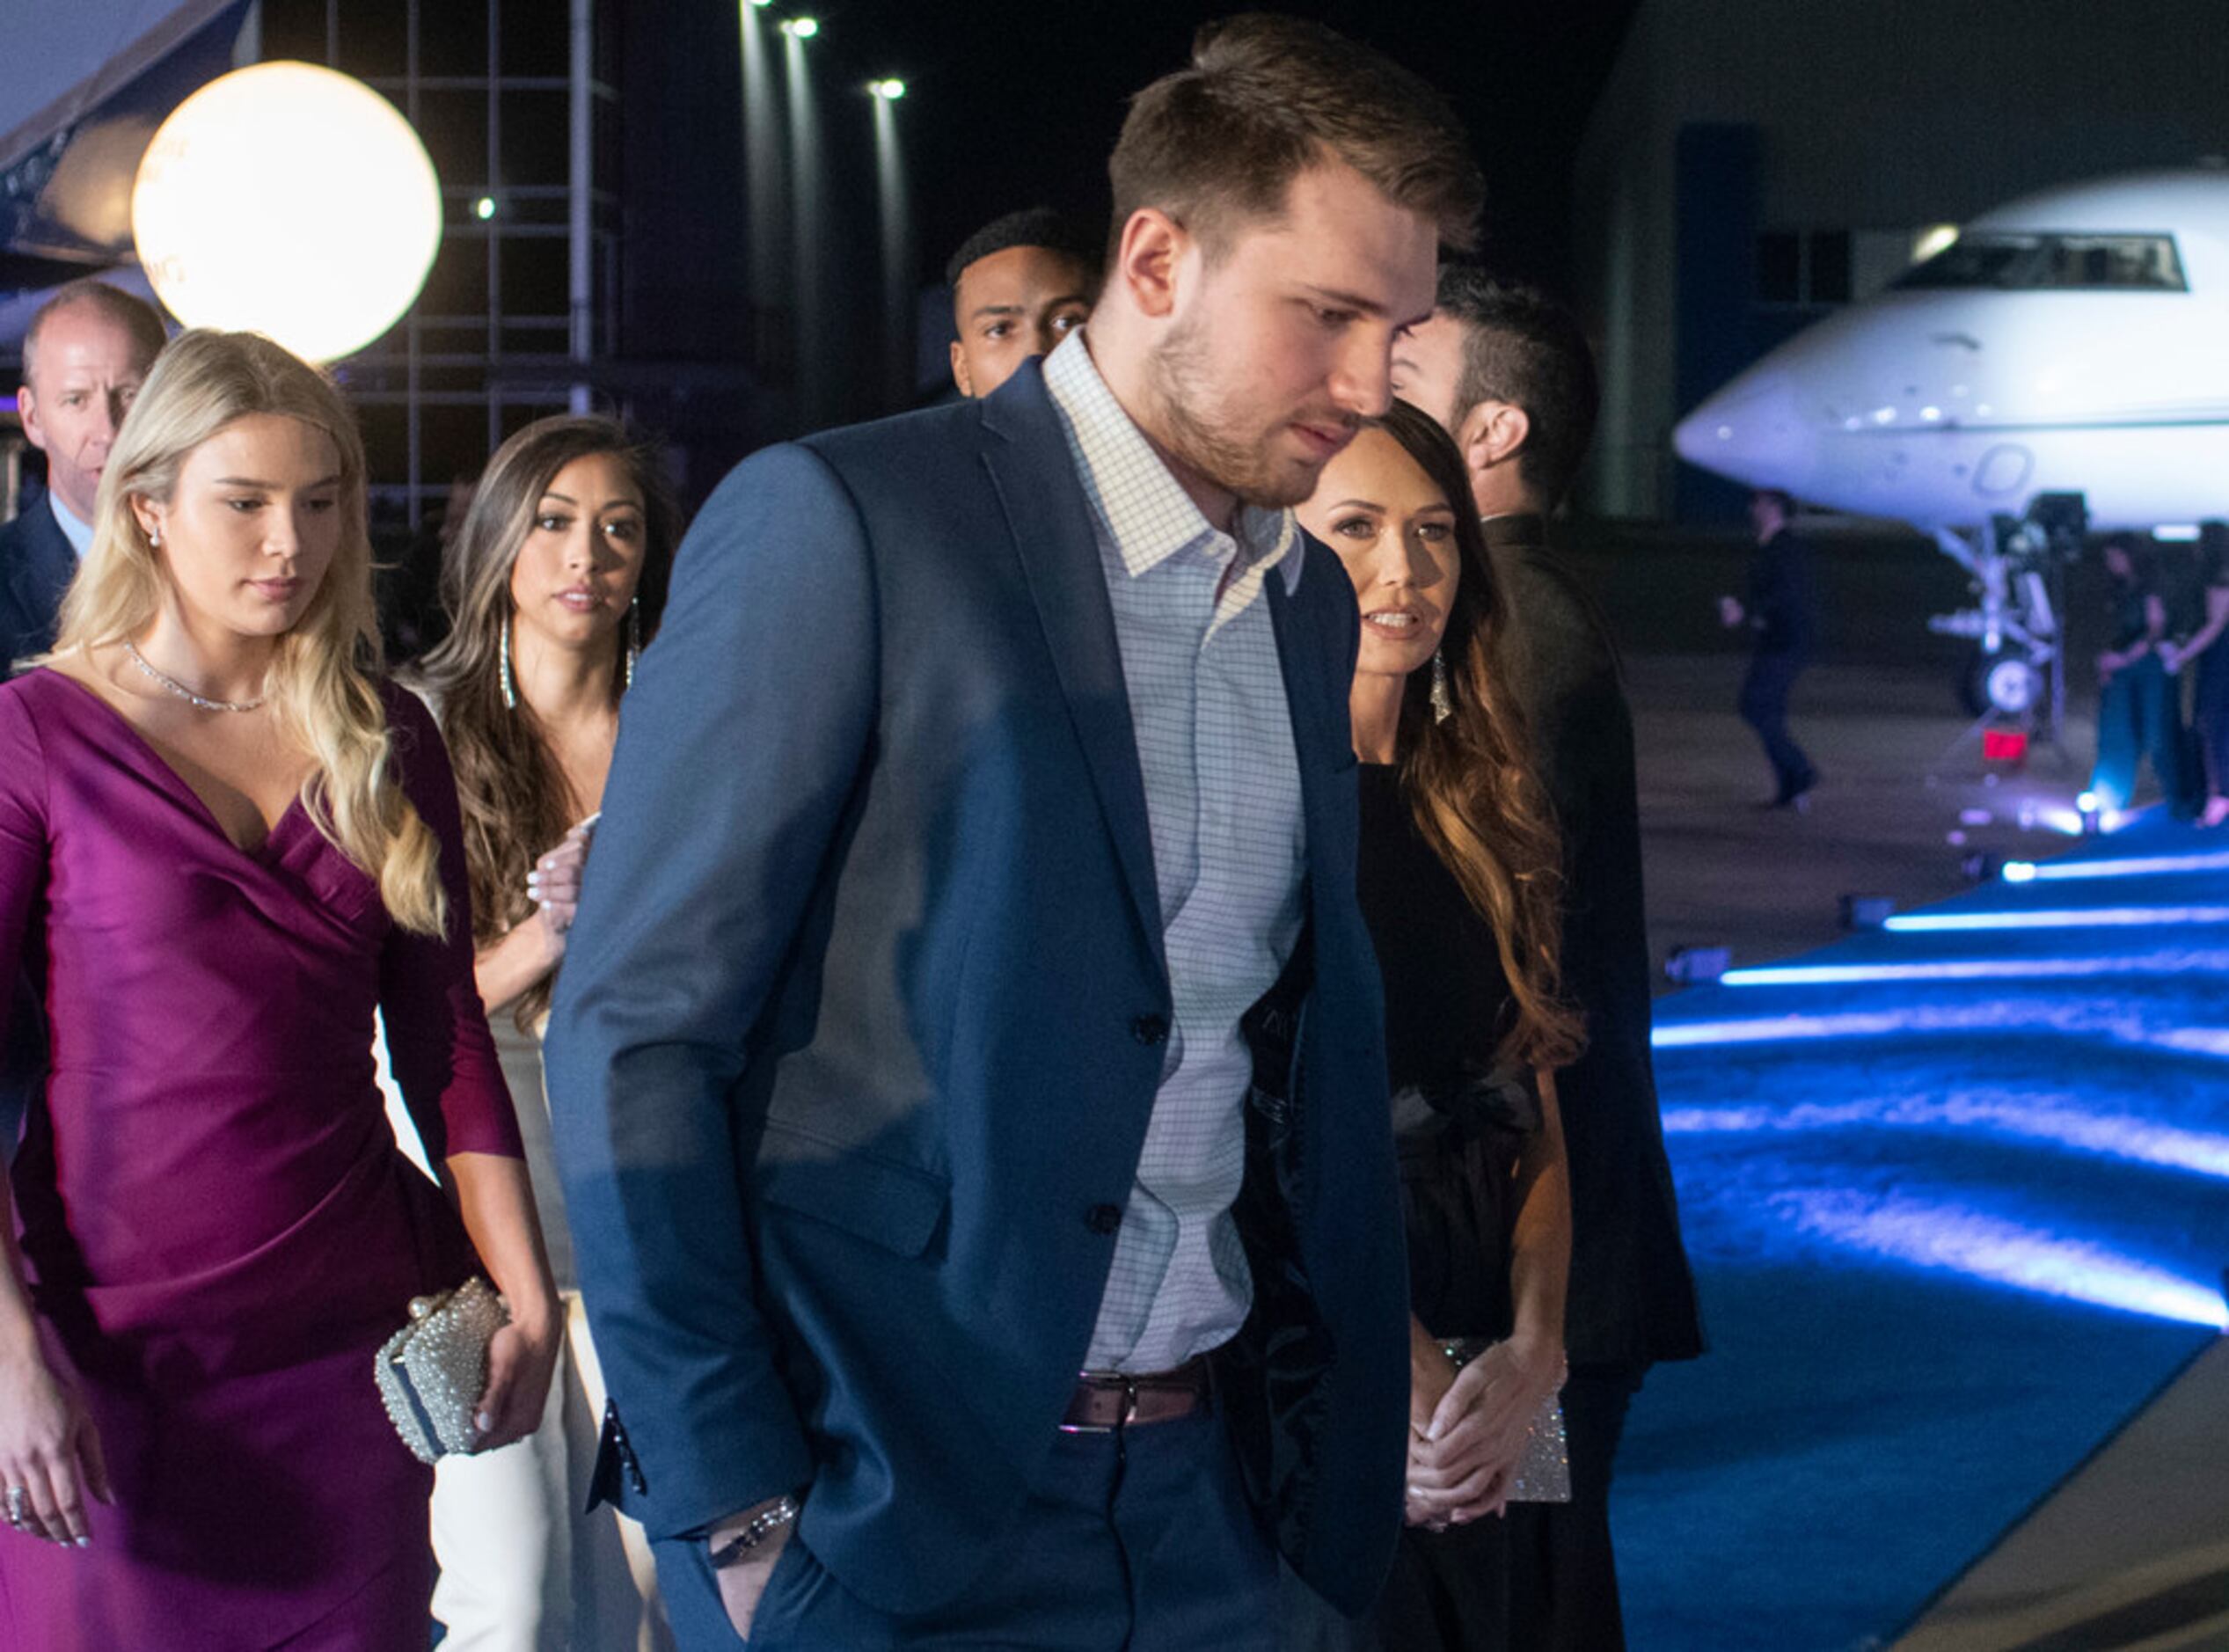 Mavs player Luka Doncic walks across the blue carpet prior to the Mavs Ball Million Air in...